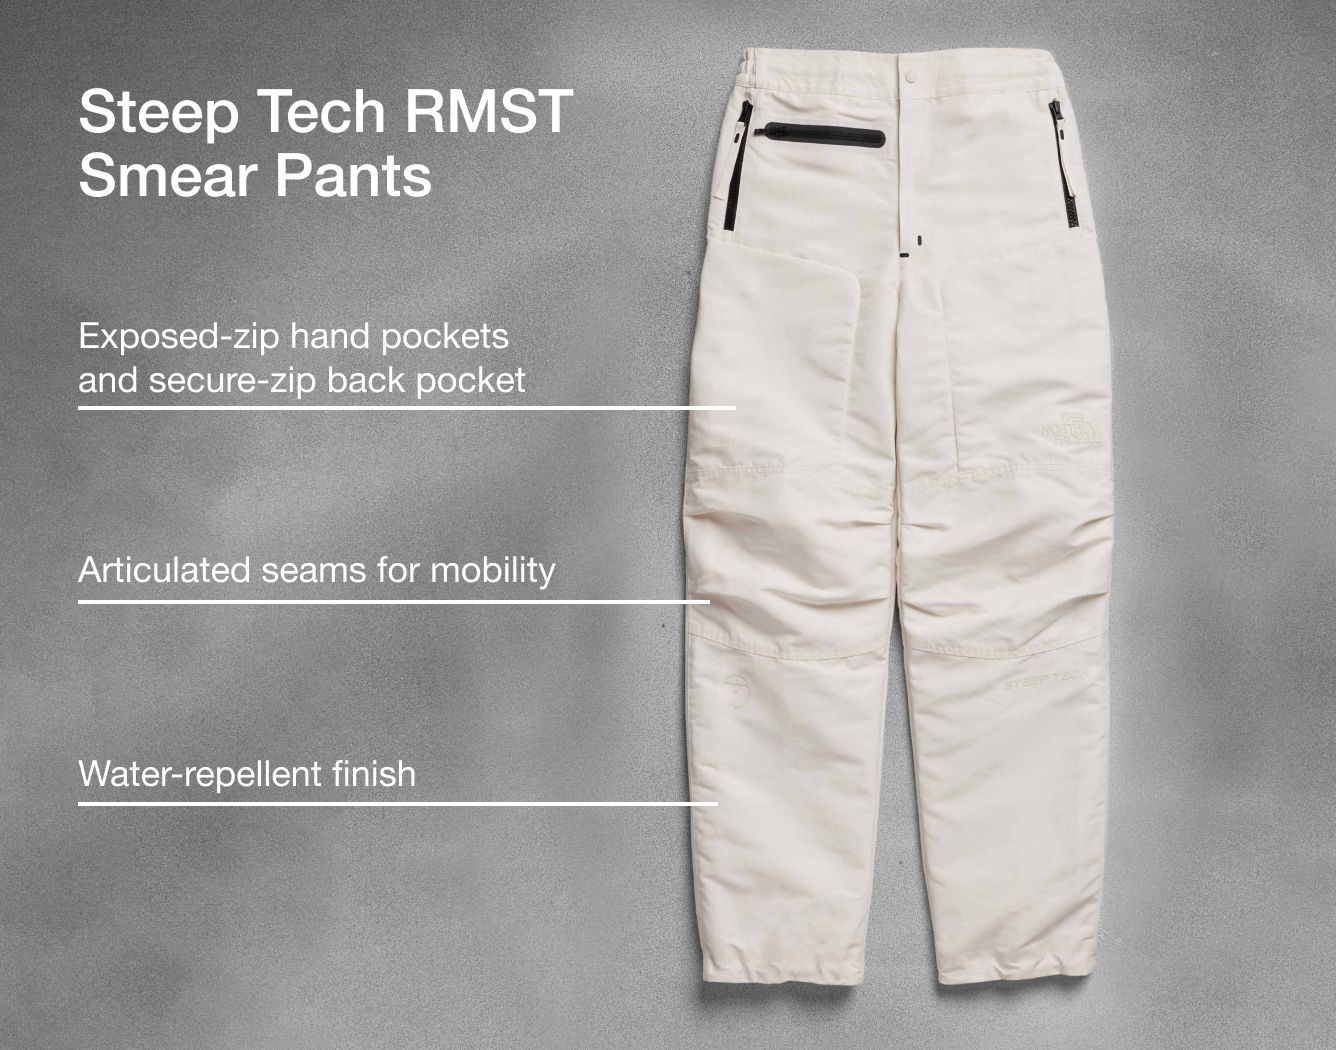 Studio shot of the Steep Tech RMST Smear Pants with text overlay pointing out fabrication and seams.